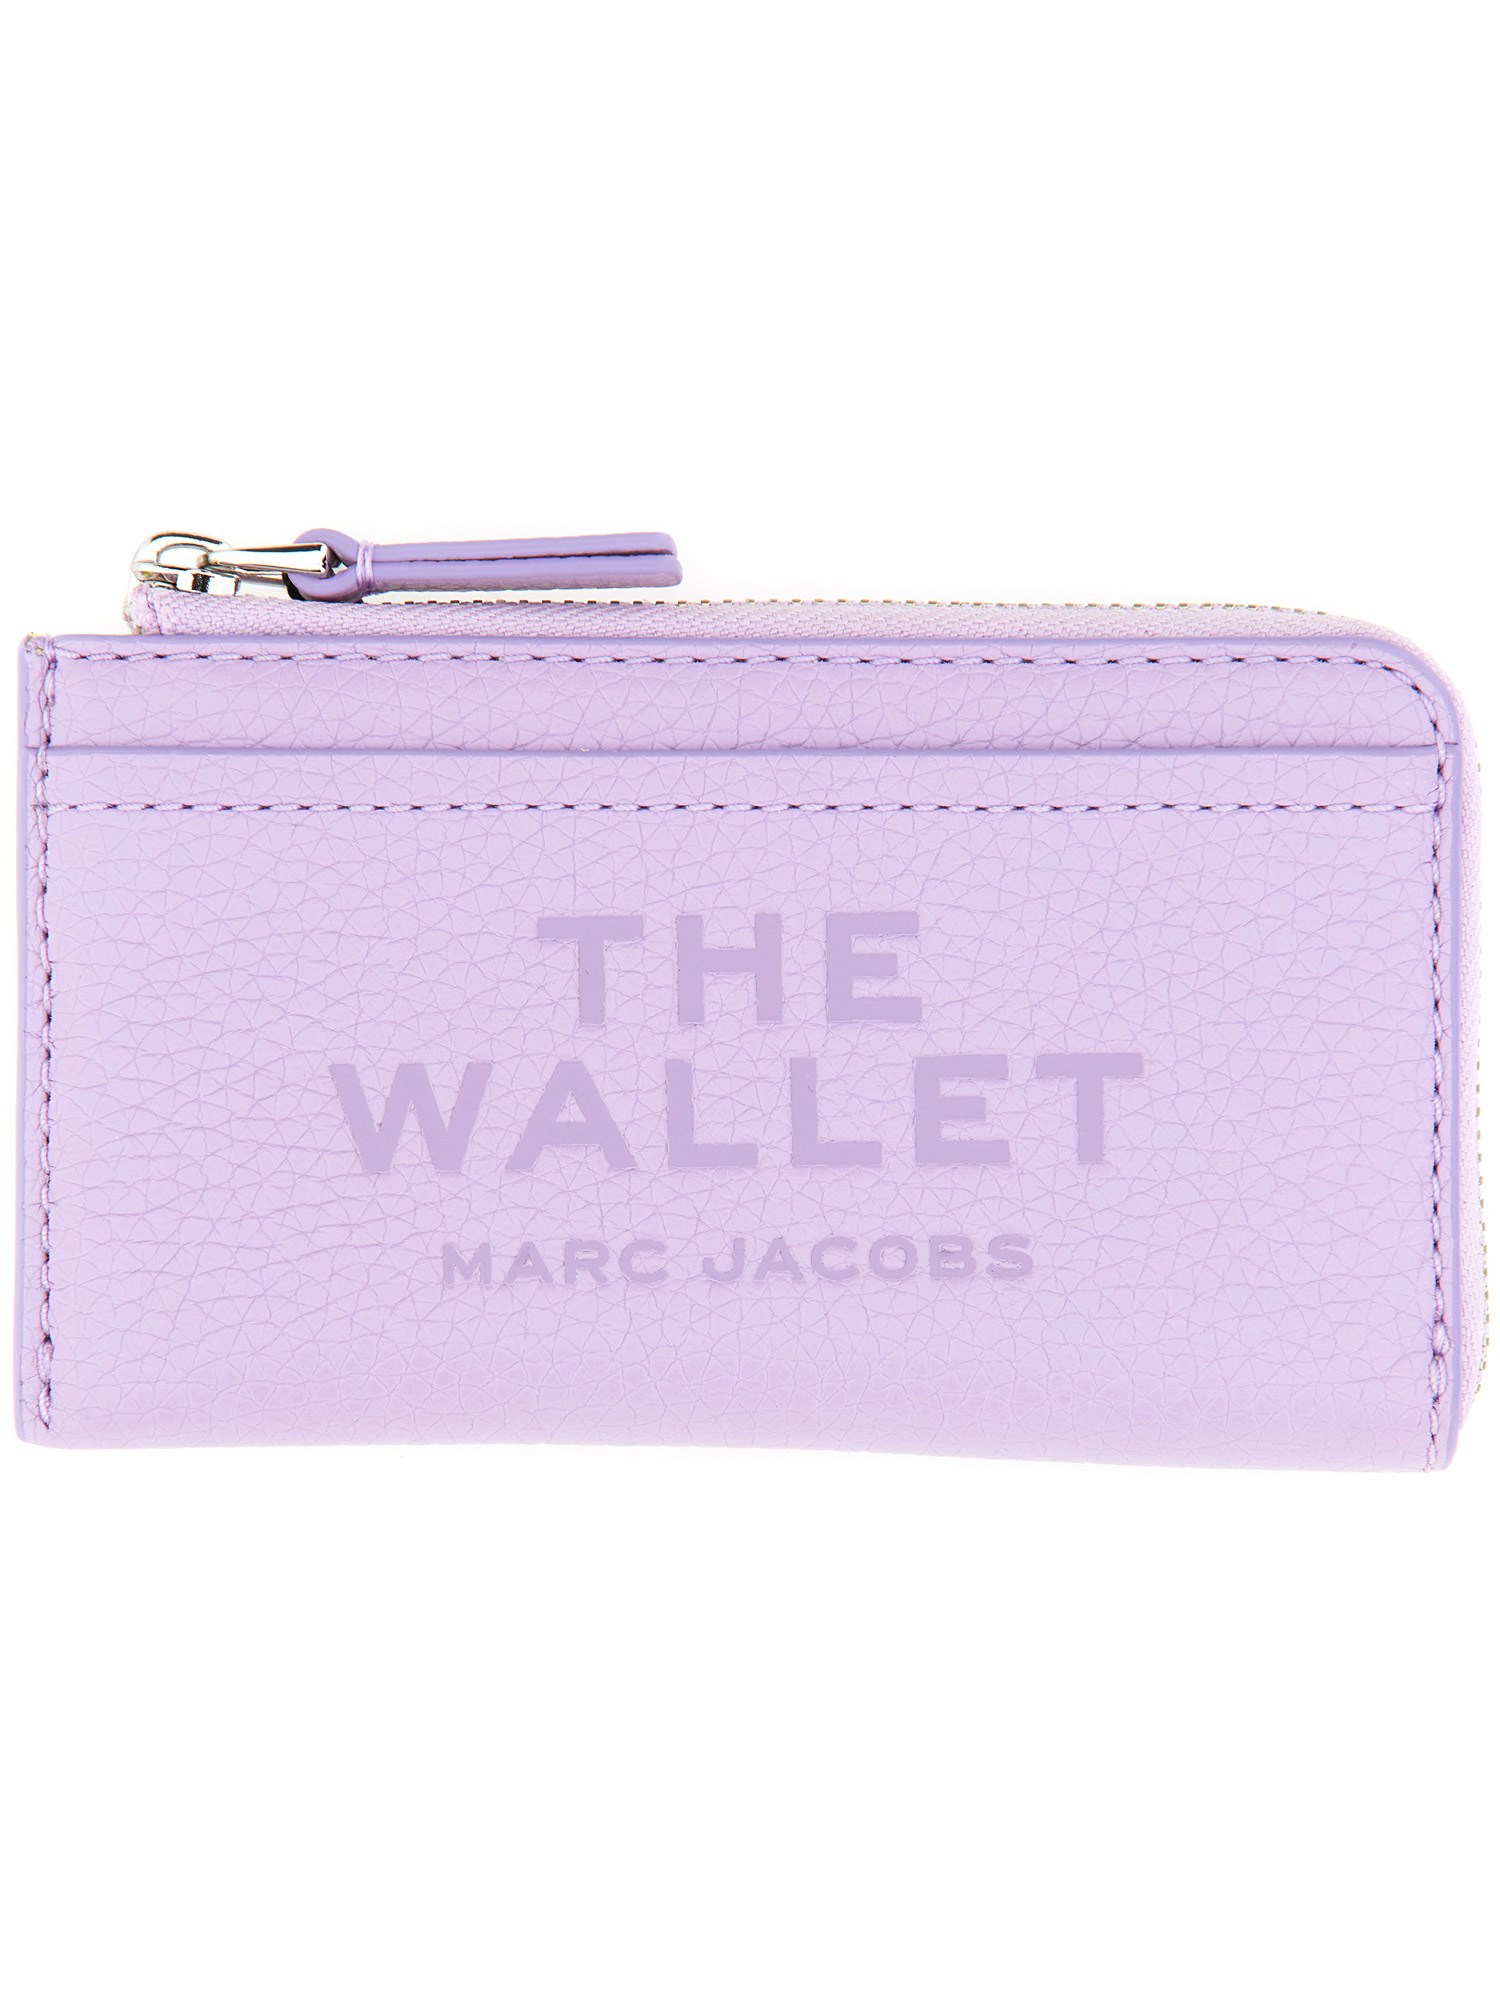 Marc Jacobs marc jacobs leather card holder